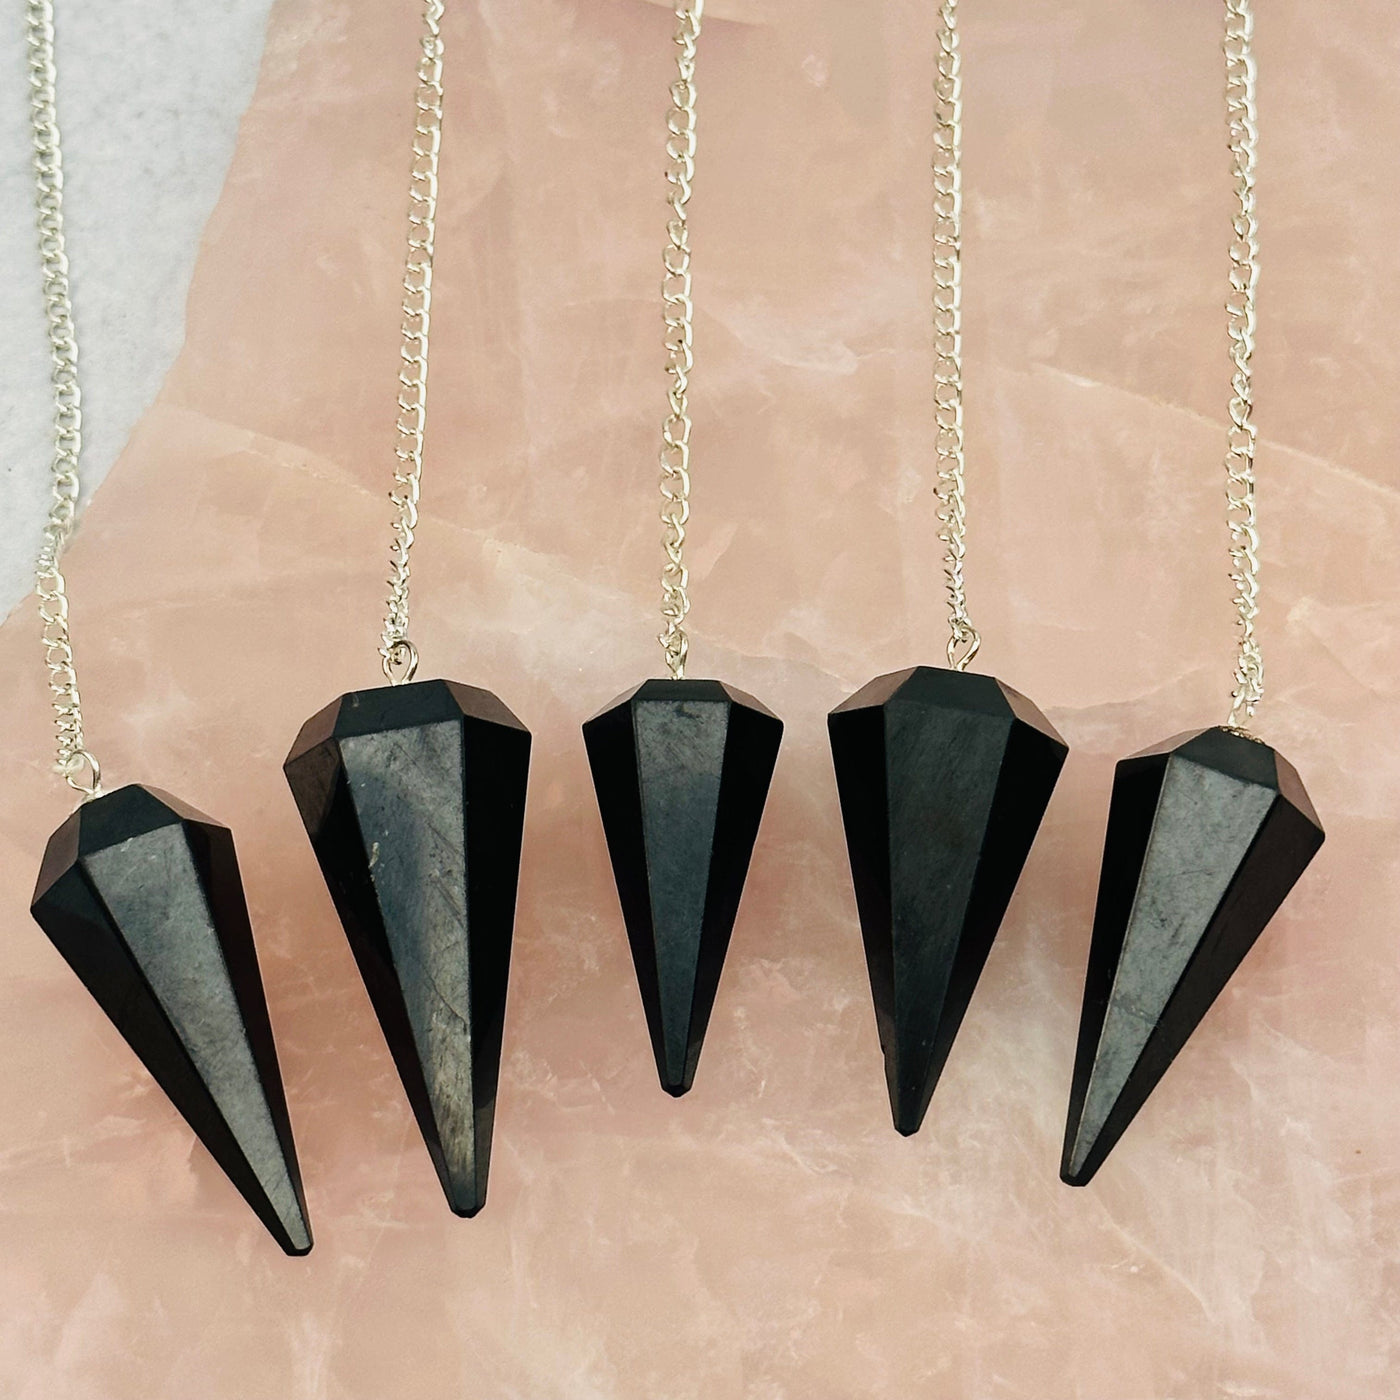 multiple Shungite Pendulums displayed to show the differences in the sizes